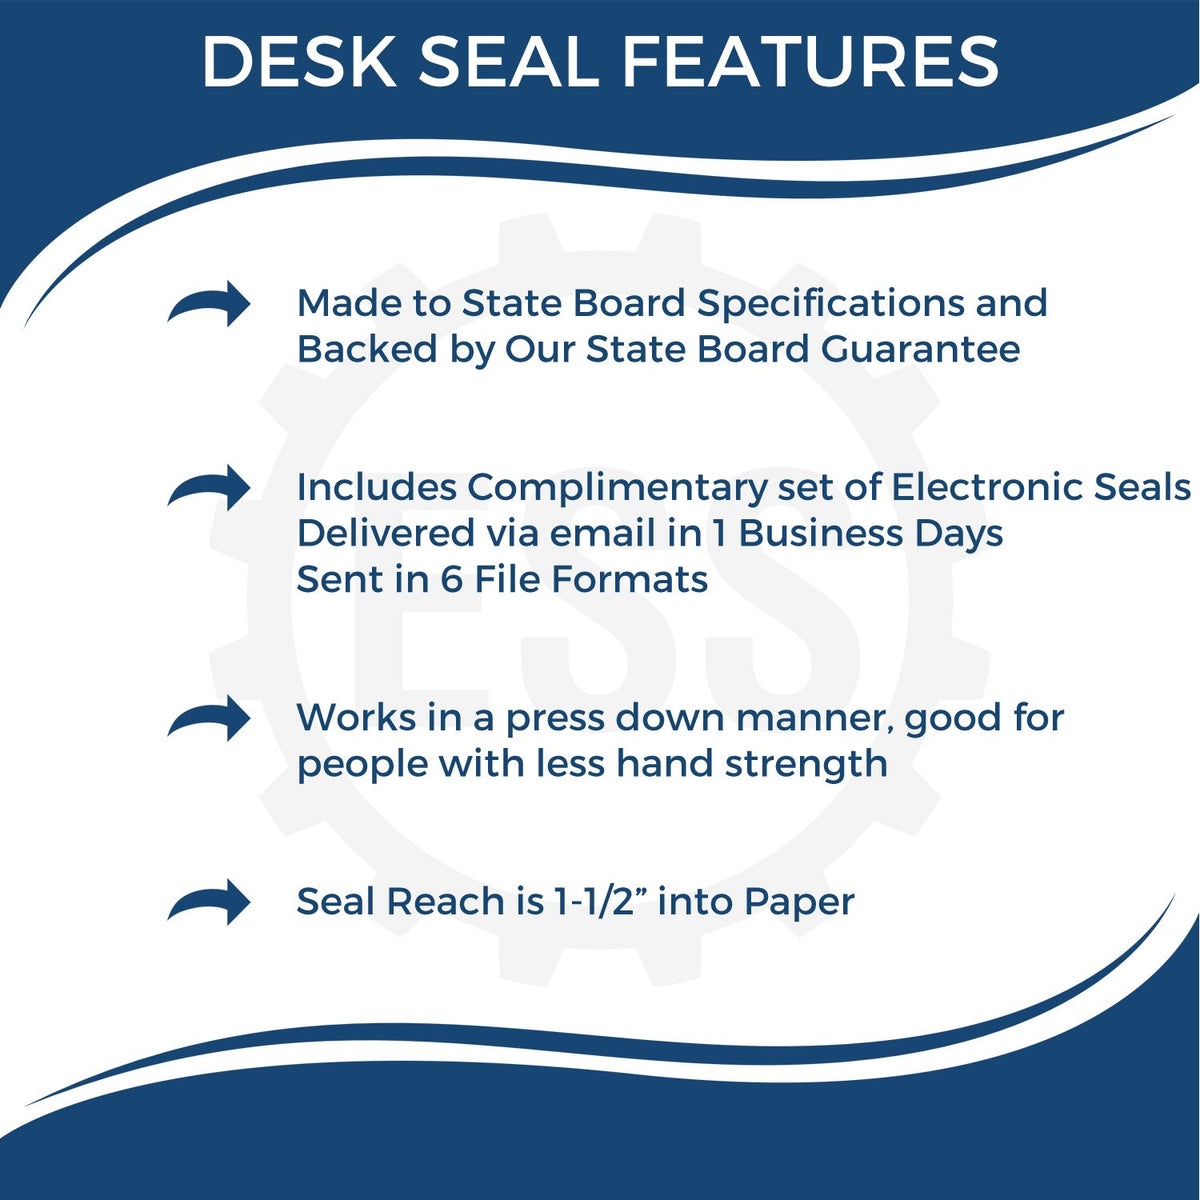 A picture of an infographic highlighting the selling points for the North Carolina Geologist Desk Seal